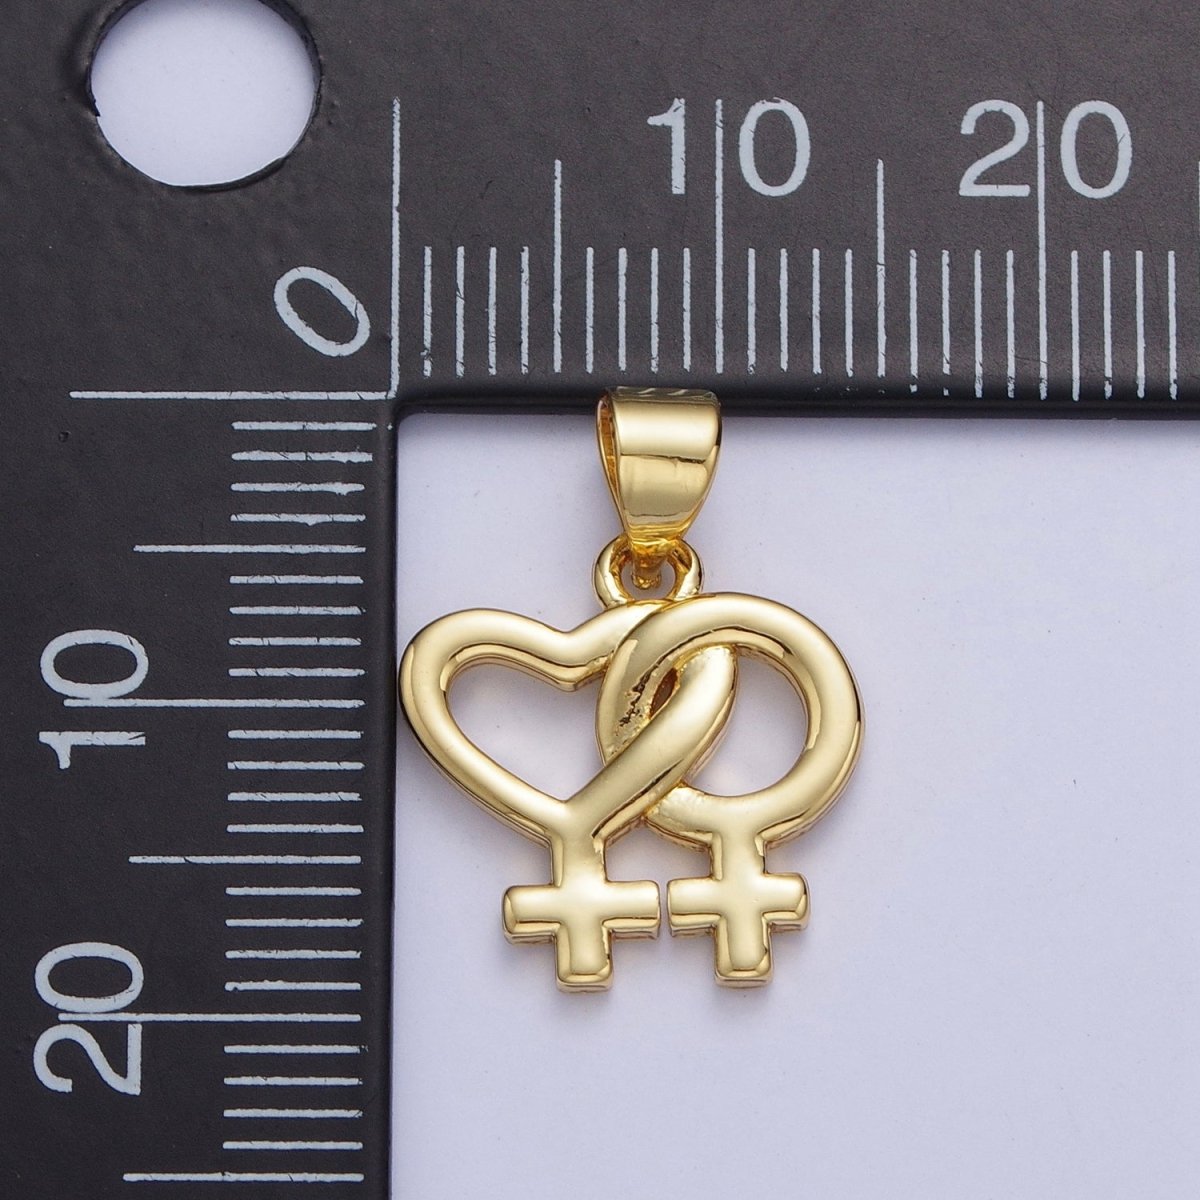 Gold Lesbian Necklace Charm 24K Gold Filled Lesbian Jewelry, Pride Necklace Pendant Lesbian Gift Couple Necklace X-421 - DLUXCA